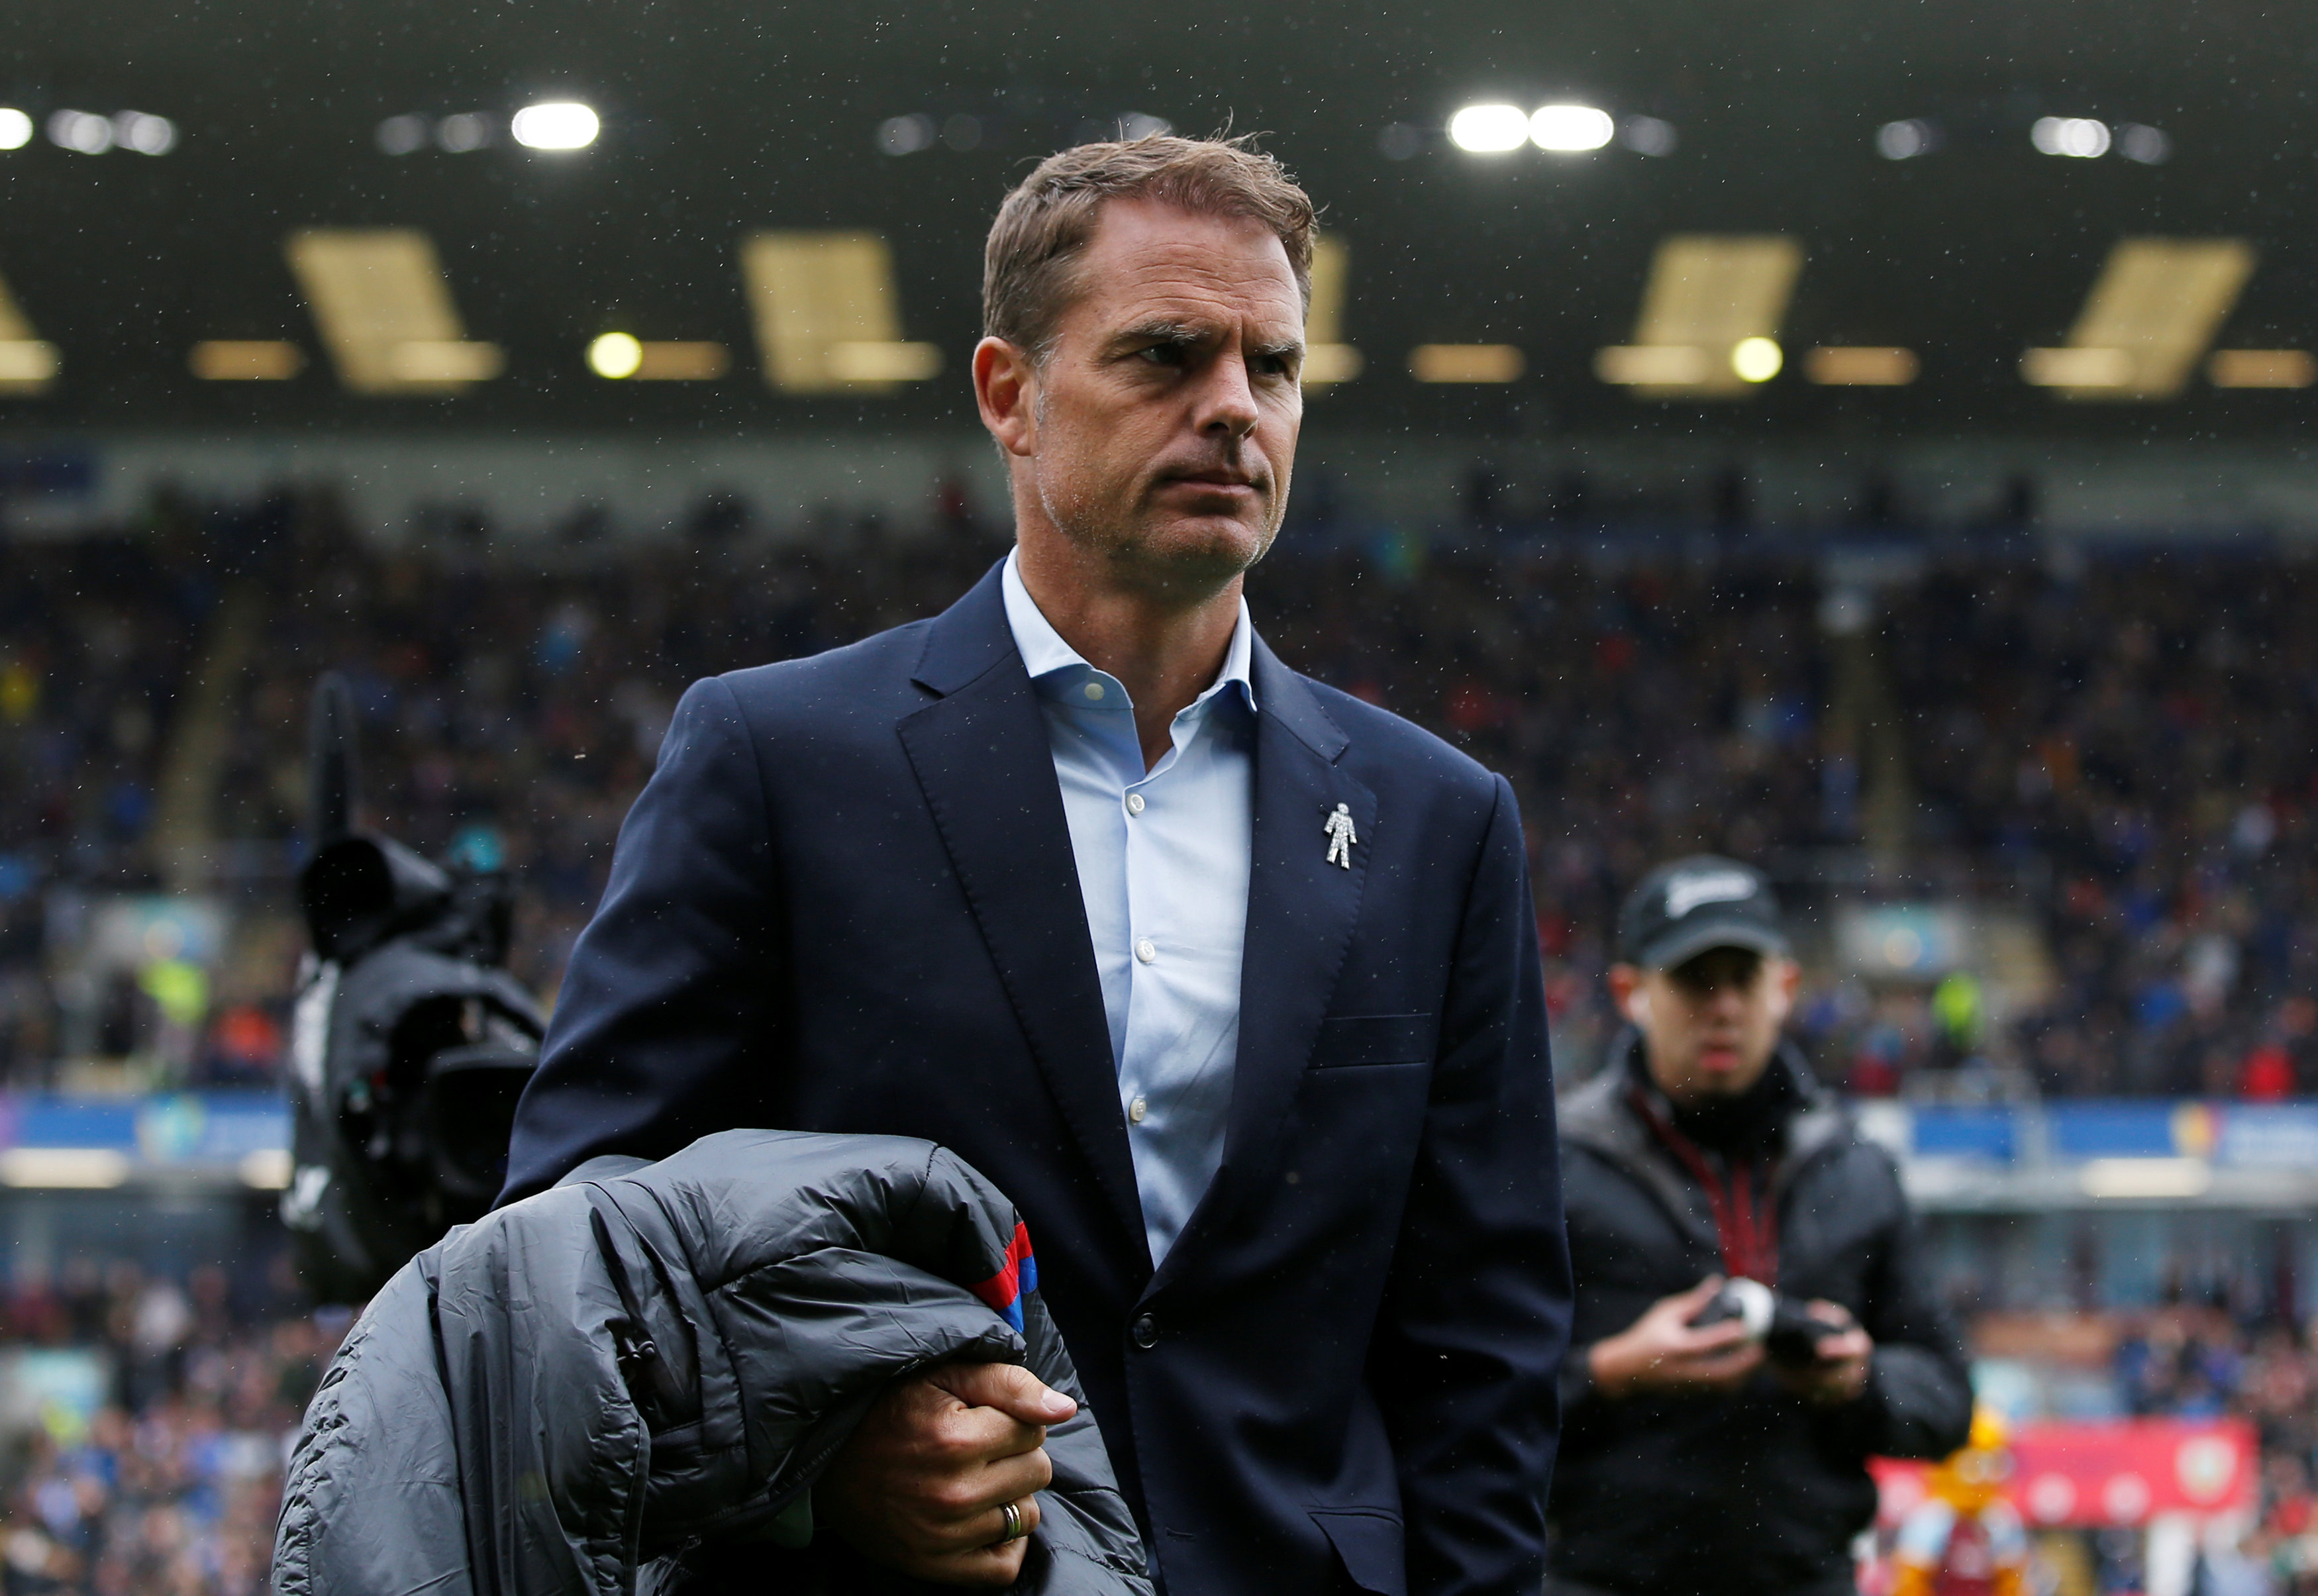 Football: Crystal Palace sack manager Frank de Boer after nightmare start to Premier League season